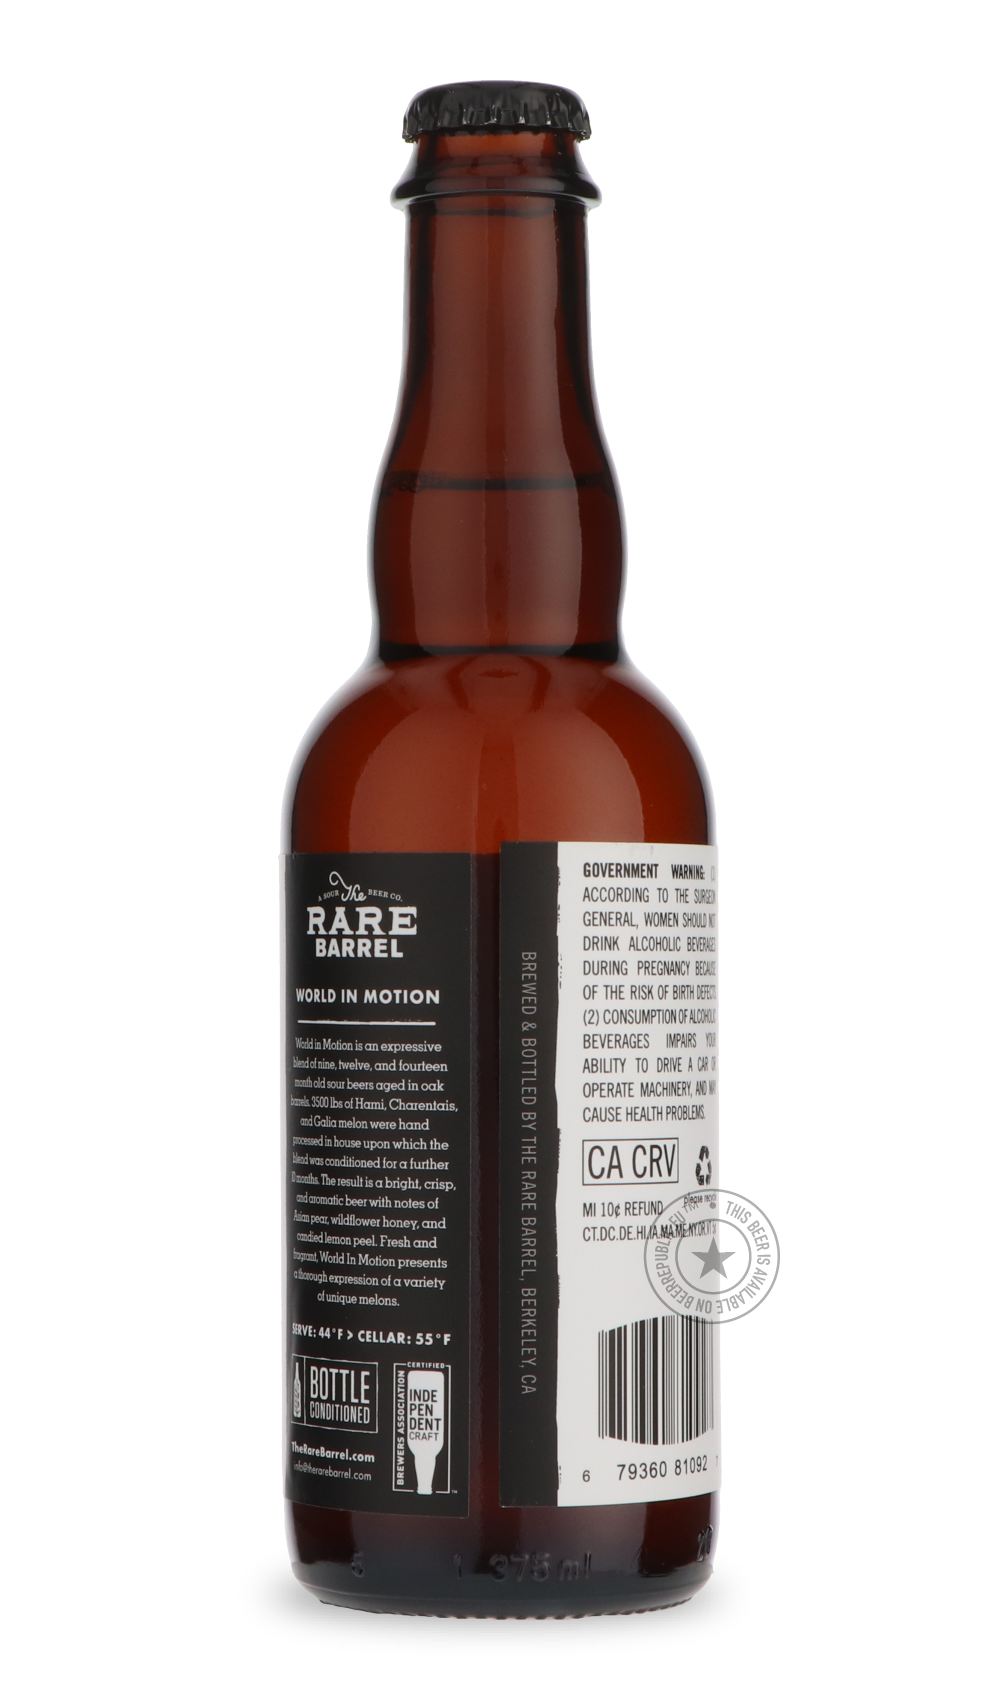 -The Rare Barrel- World In Motion 2021-Sour / Wild & Fruity- Only @ Beer Republic - The best online beer store for American & Canadian craft beer - Buy beer online from the USA and Canada - Bier online kopen - Amerikaans bier kopen - Craft beer store - Craft beer kopen - Amerikanisch bier kaufen - Bier online kaufen - Acheter biere online - IPA - Stout - Porter - New England IPA - Hazy IPA - Imperial Stout - Barrel Aged - Barrel Aged Imperial Stout - Brown - Dark beer - Blond - Blonde - Pilsner - Lager - Wh